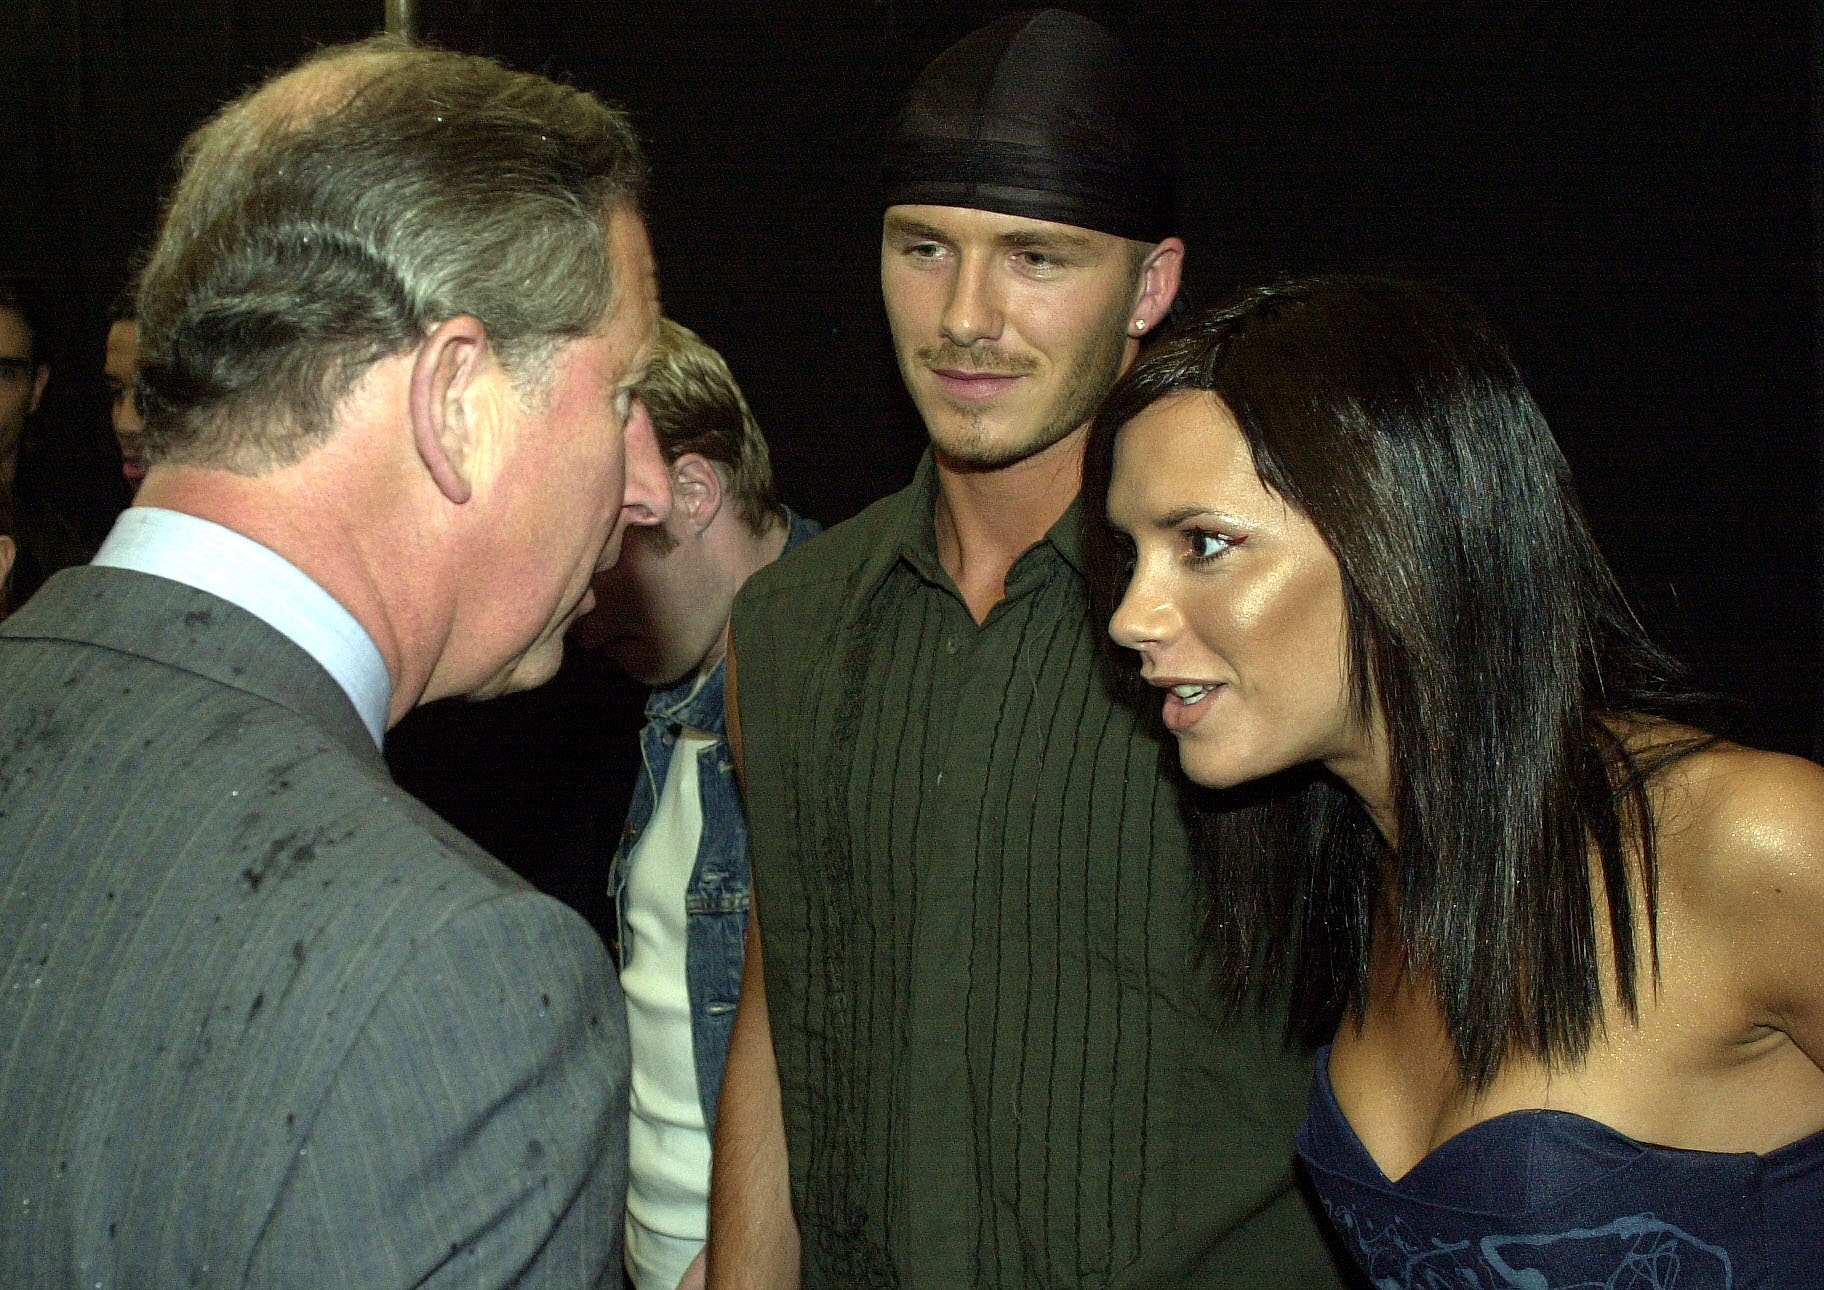 The Prince of Wales, (r) meets pop star Victoria Beckham (Posh Spice) and her footballing husband David at the Princes Trust Capital FM Party in the Park 2000, London. Victoria made her solo debut at the huge outdoor charity show. (Matthew Fearn - PA Images—PA Images via Getty Images)